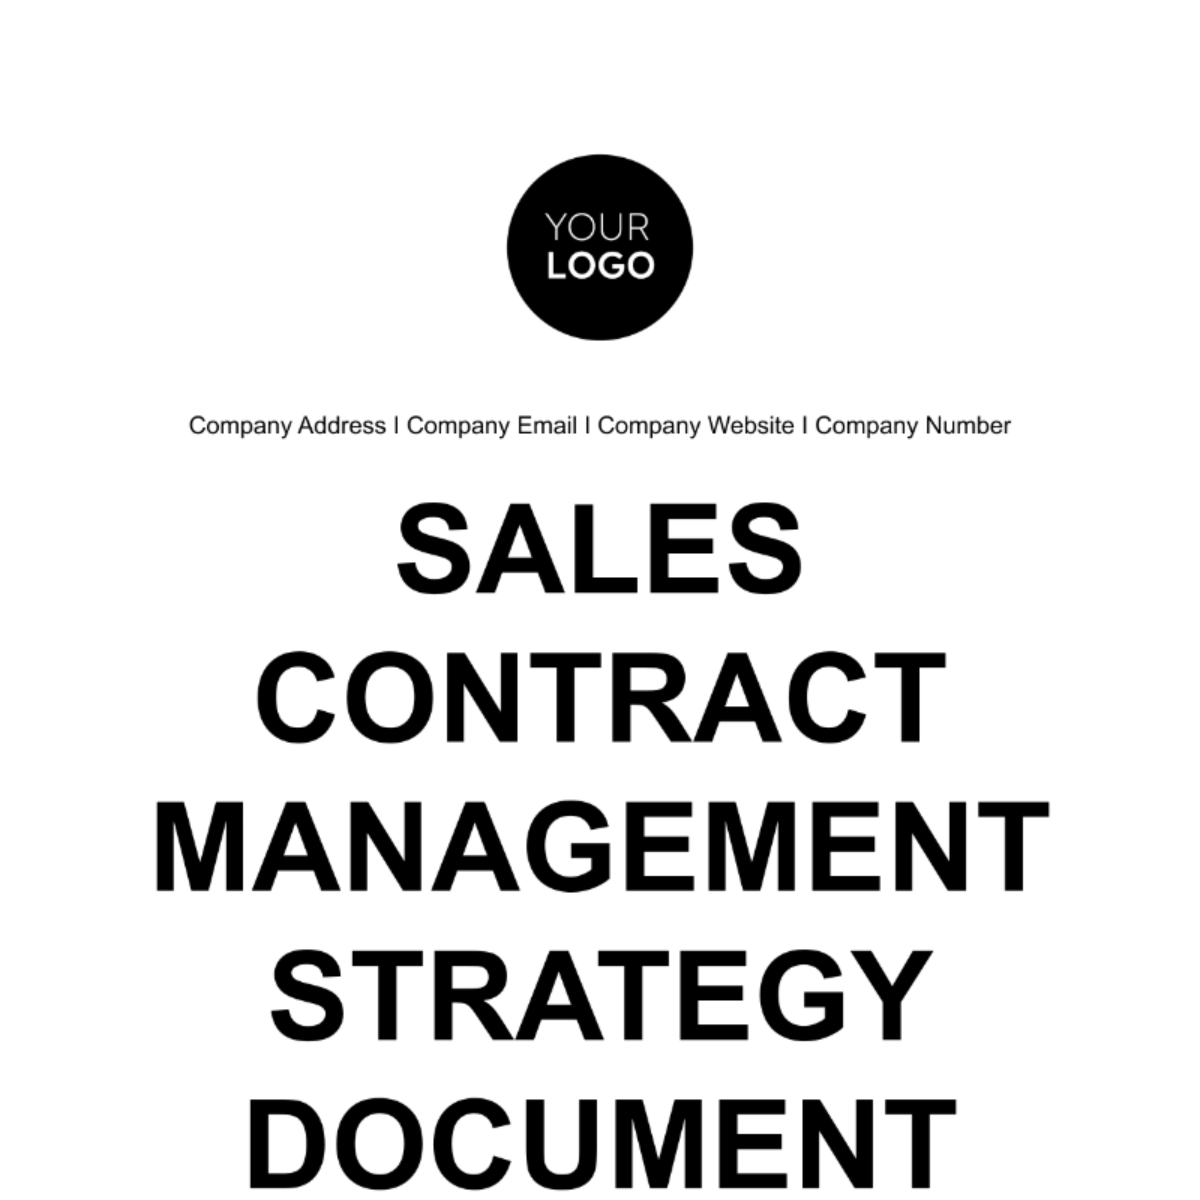 Free Sales Contract Management Strategy Document Template